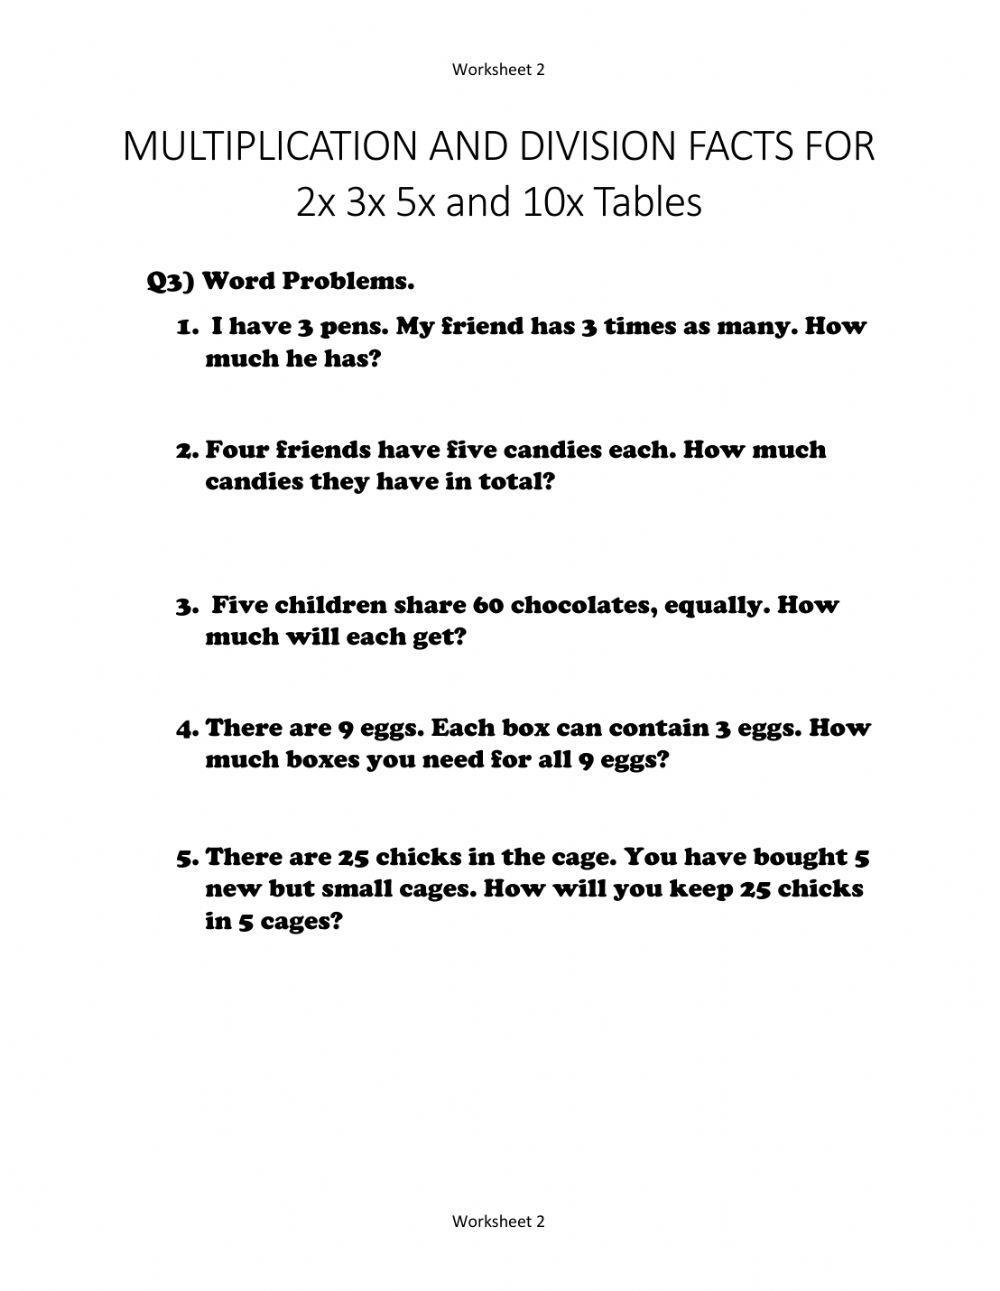 Multiplication and Division facts for 2x,3x,5x and 10x tables - Word Problems